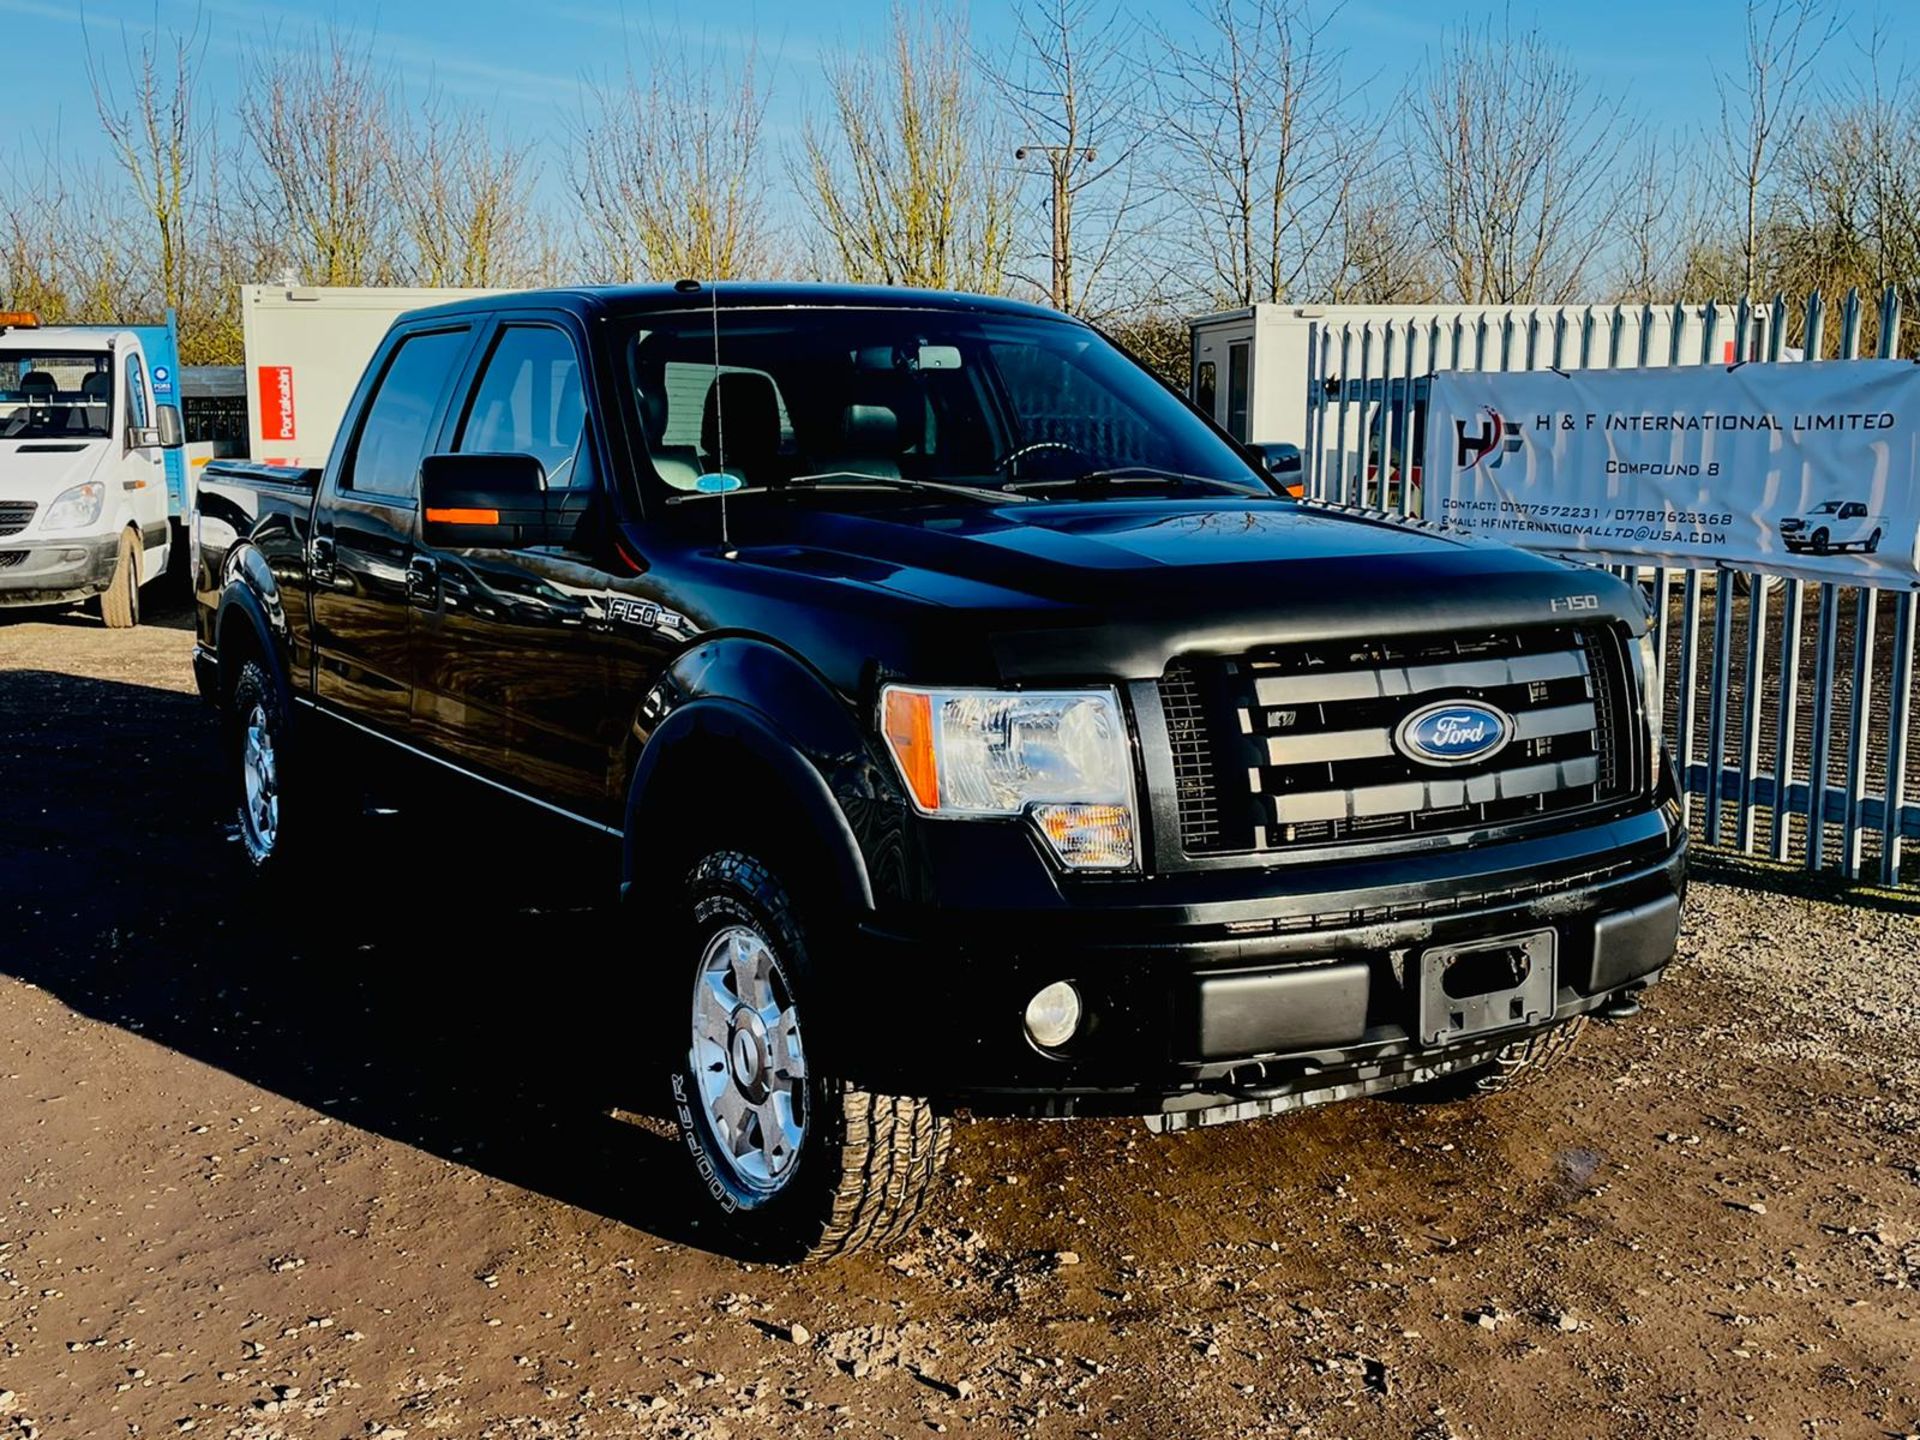 Ford F-150 5.4L V8 SuperCab 4WD FX4 Edition '2010 Year' Colour Coded Package - Top Spec - Image 5 of 44